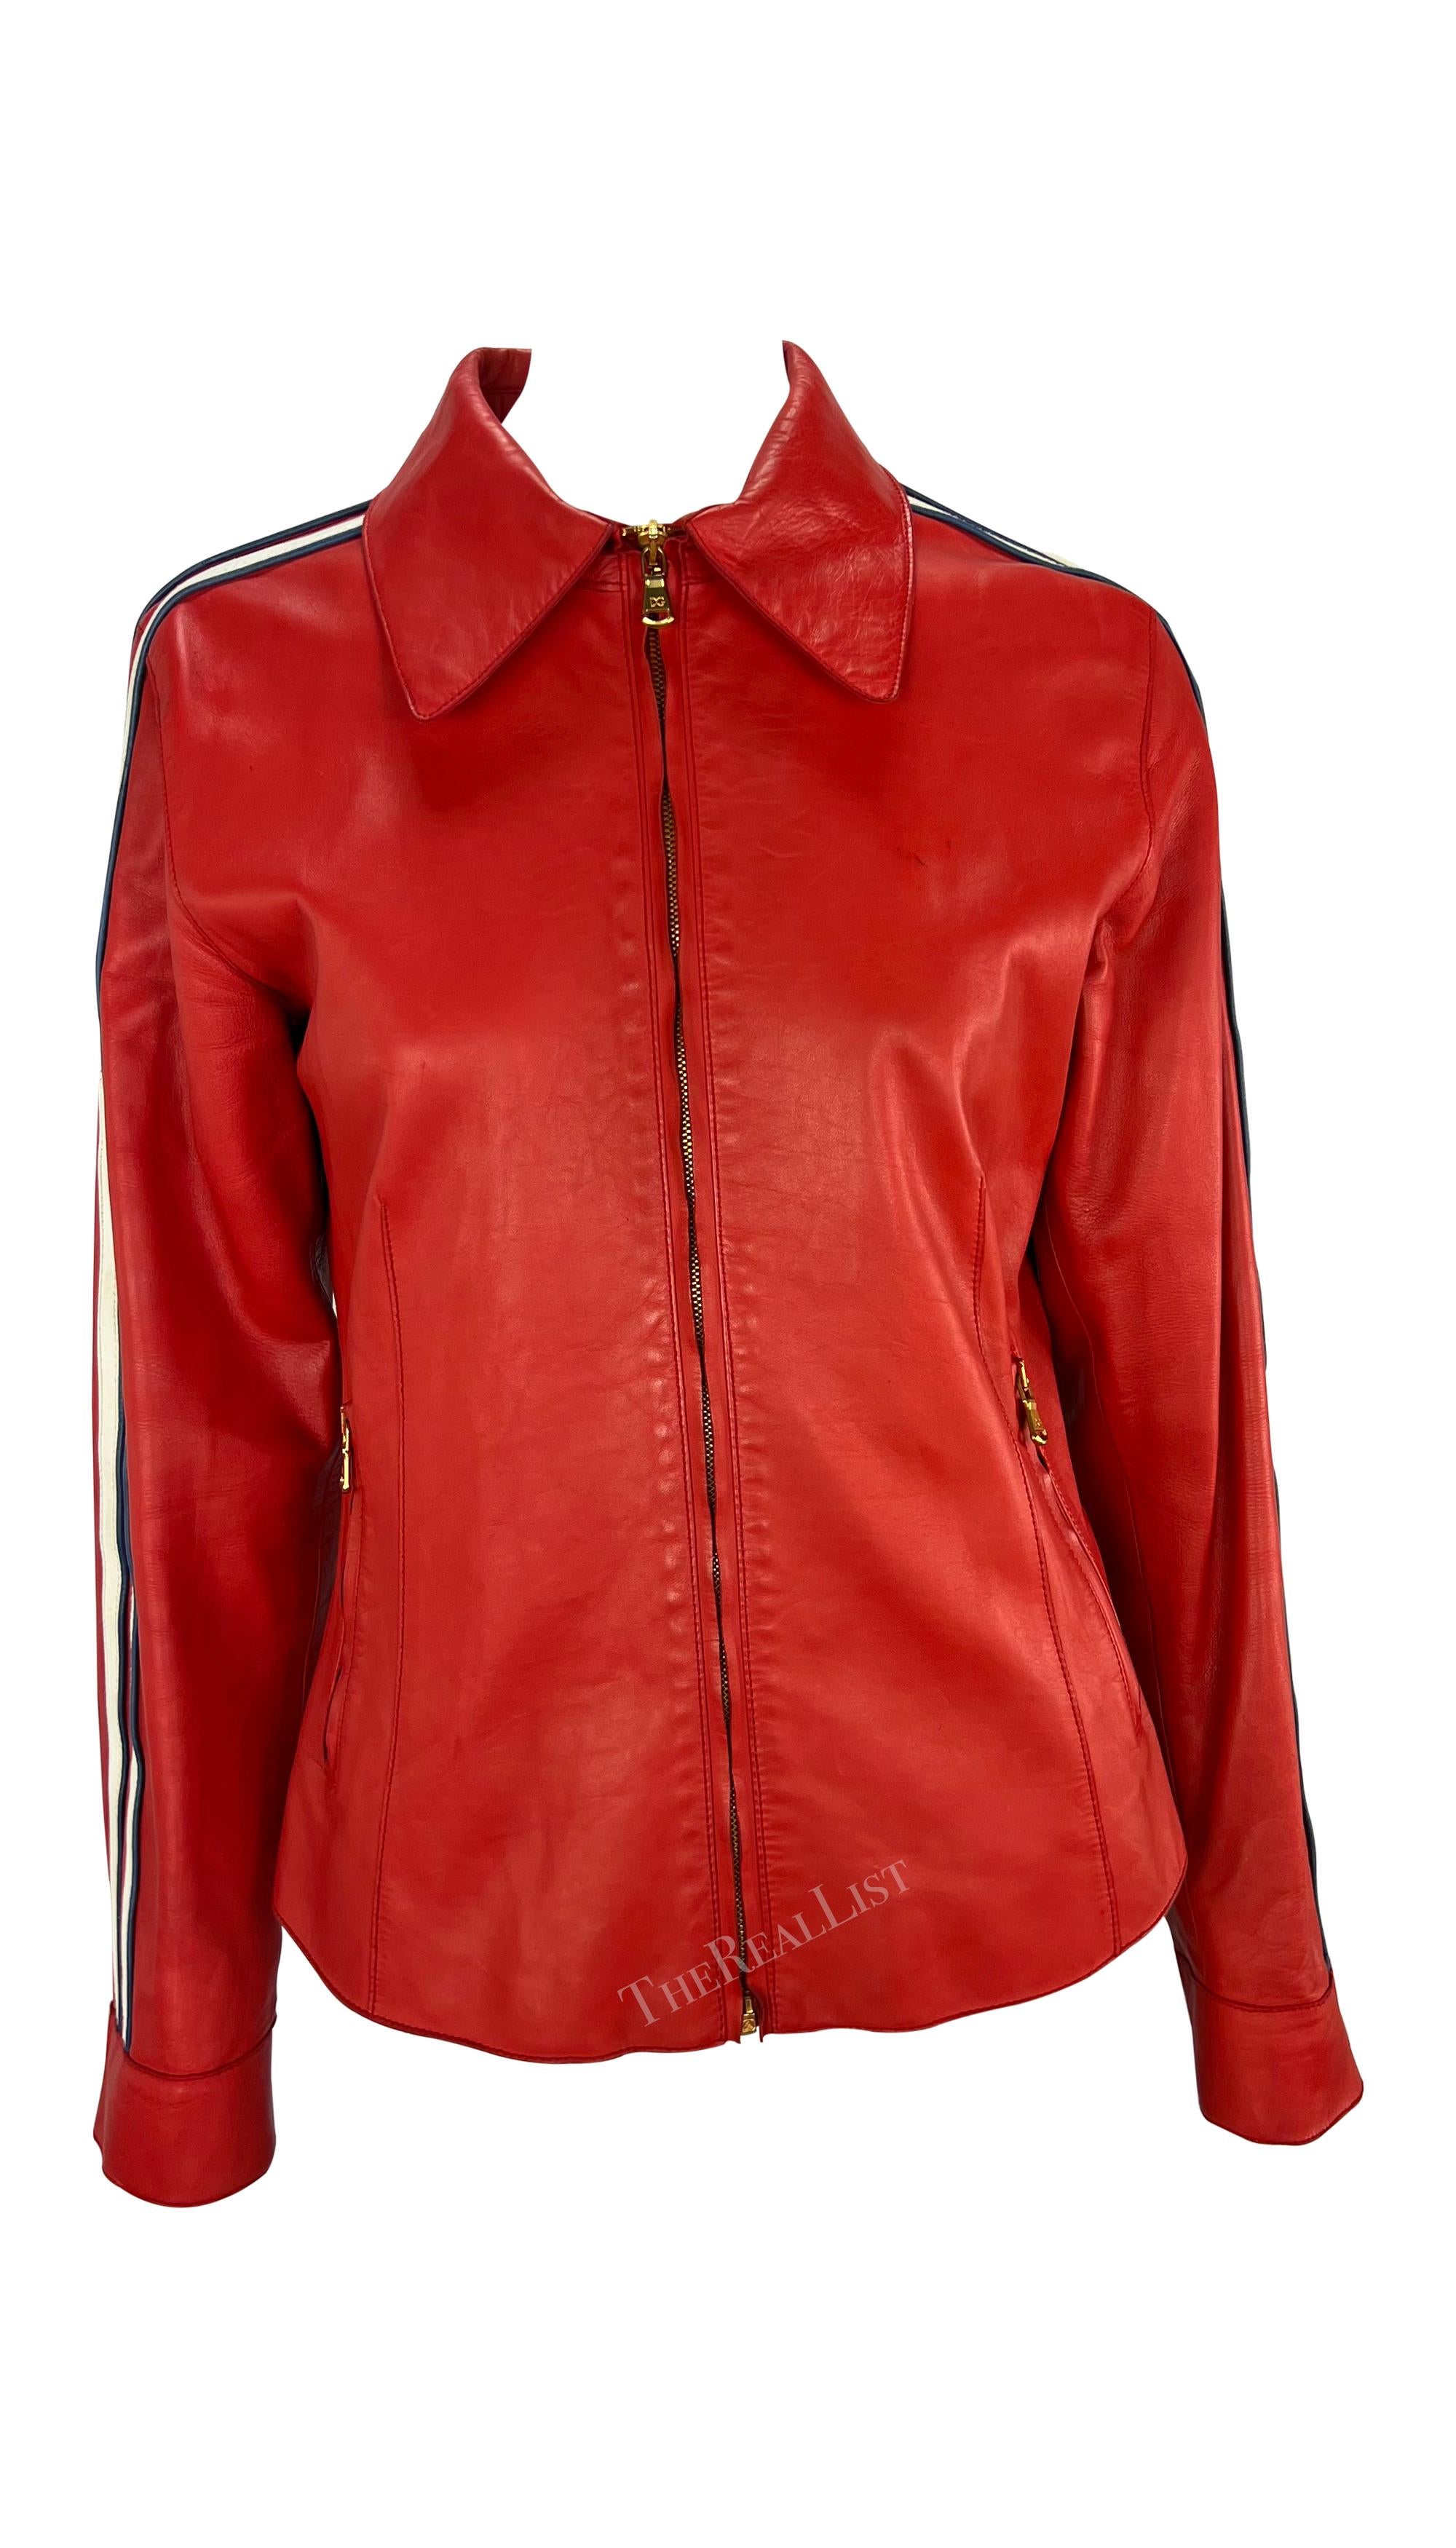 Women's S/S 2001 Dolce & Gabbana Red Moto Style Leather Jacket For Sale